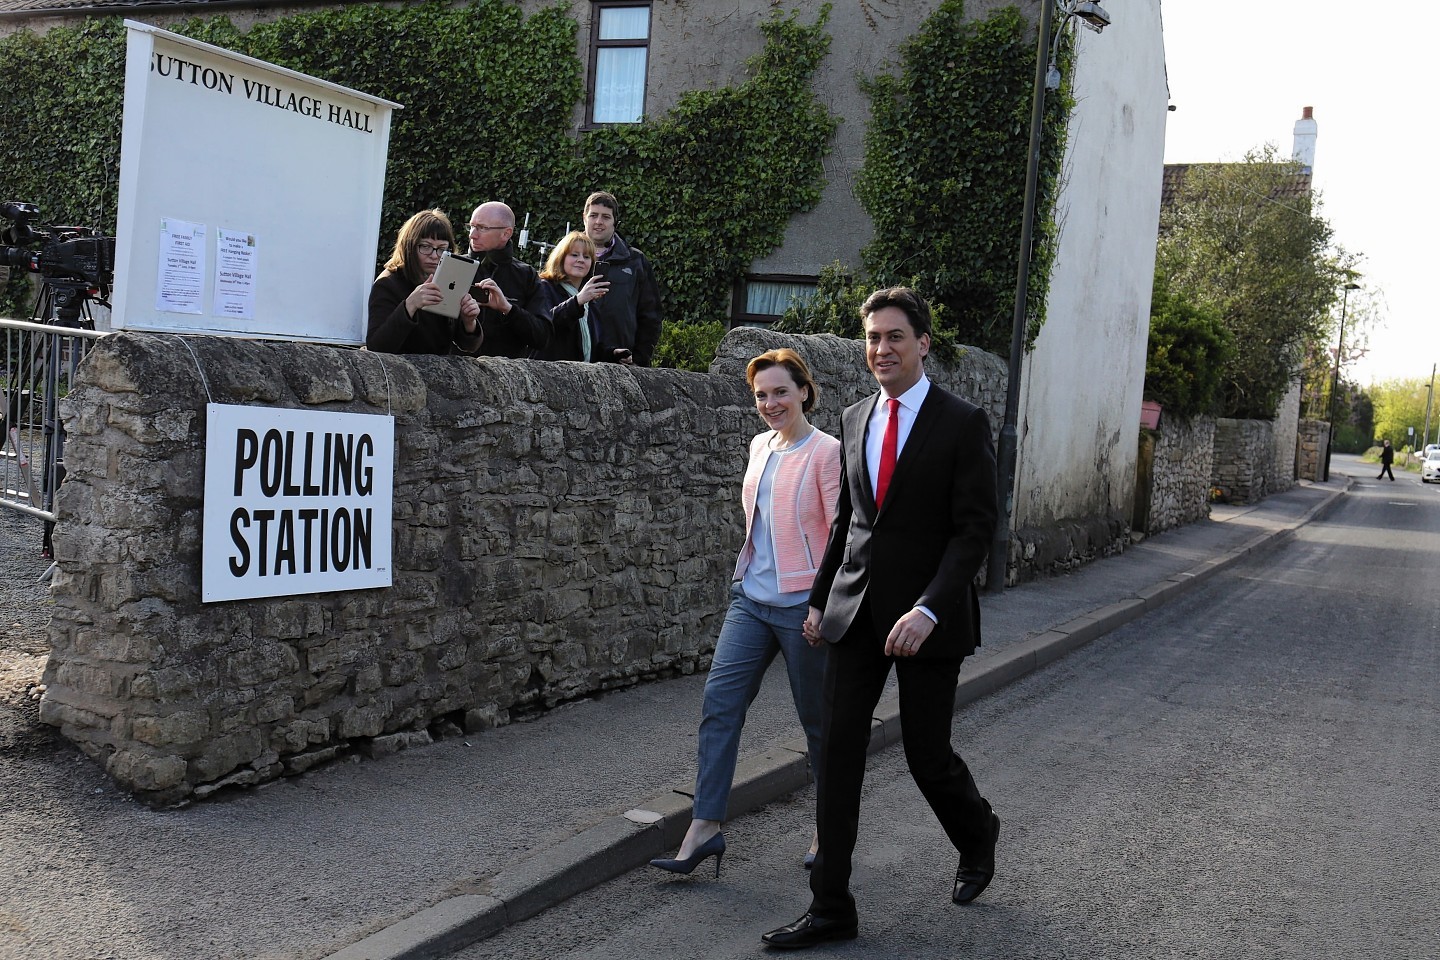 Labour Party leader Ed Miliband and his wife Justine arrive to cast their votes at Sutton village hall in Doncaster, as Britain goes to the ballot box today